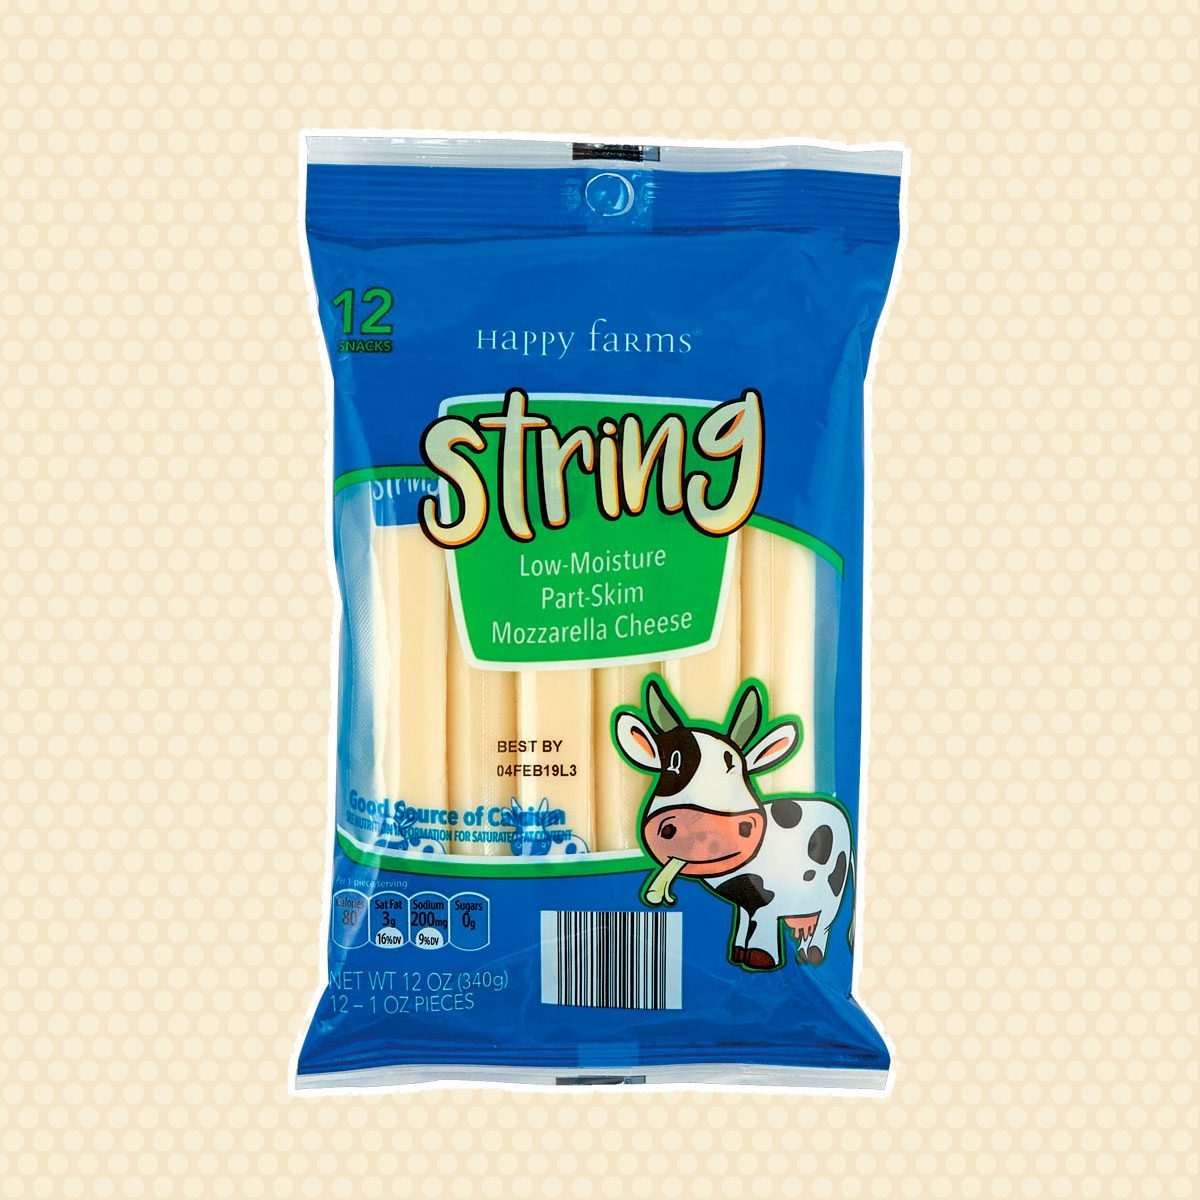 Happy Farms string cheese